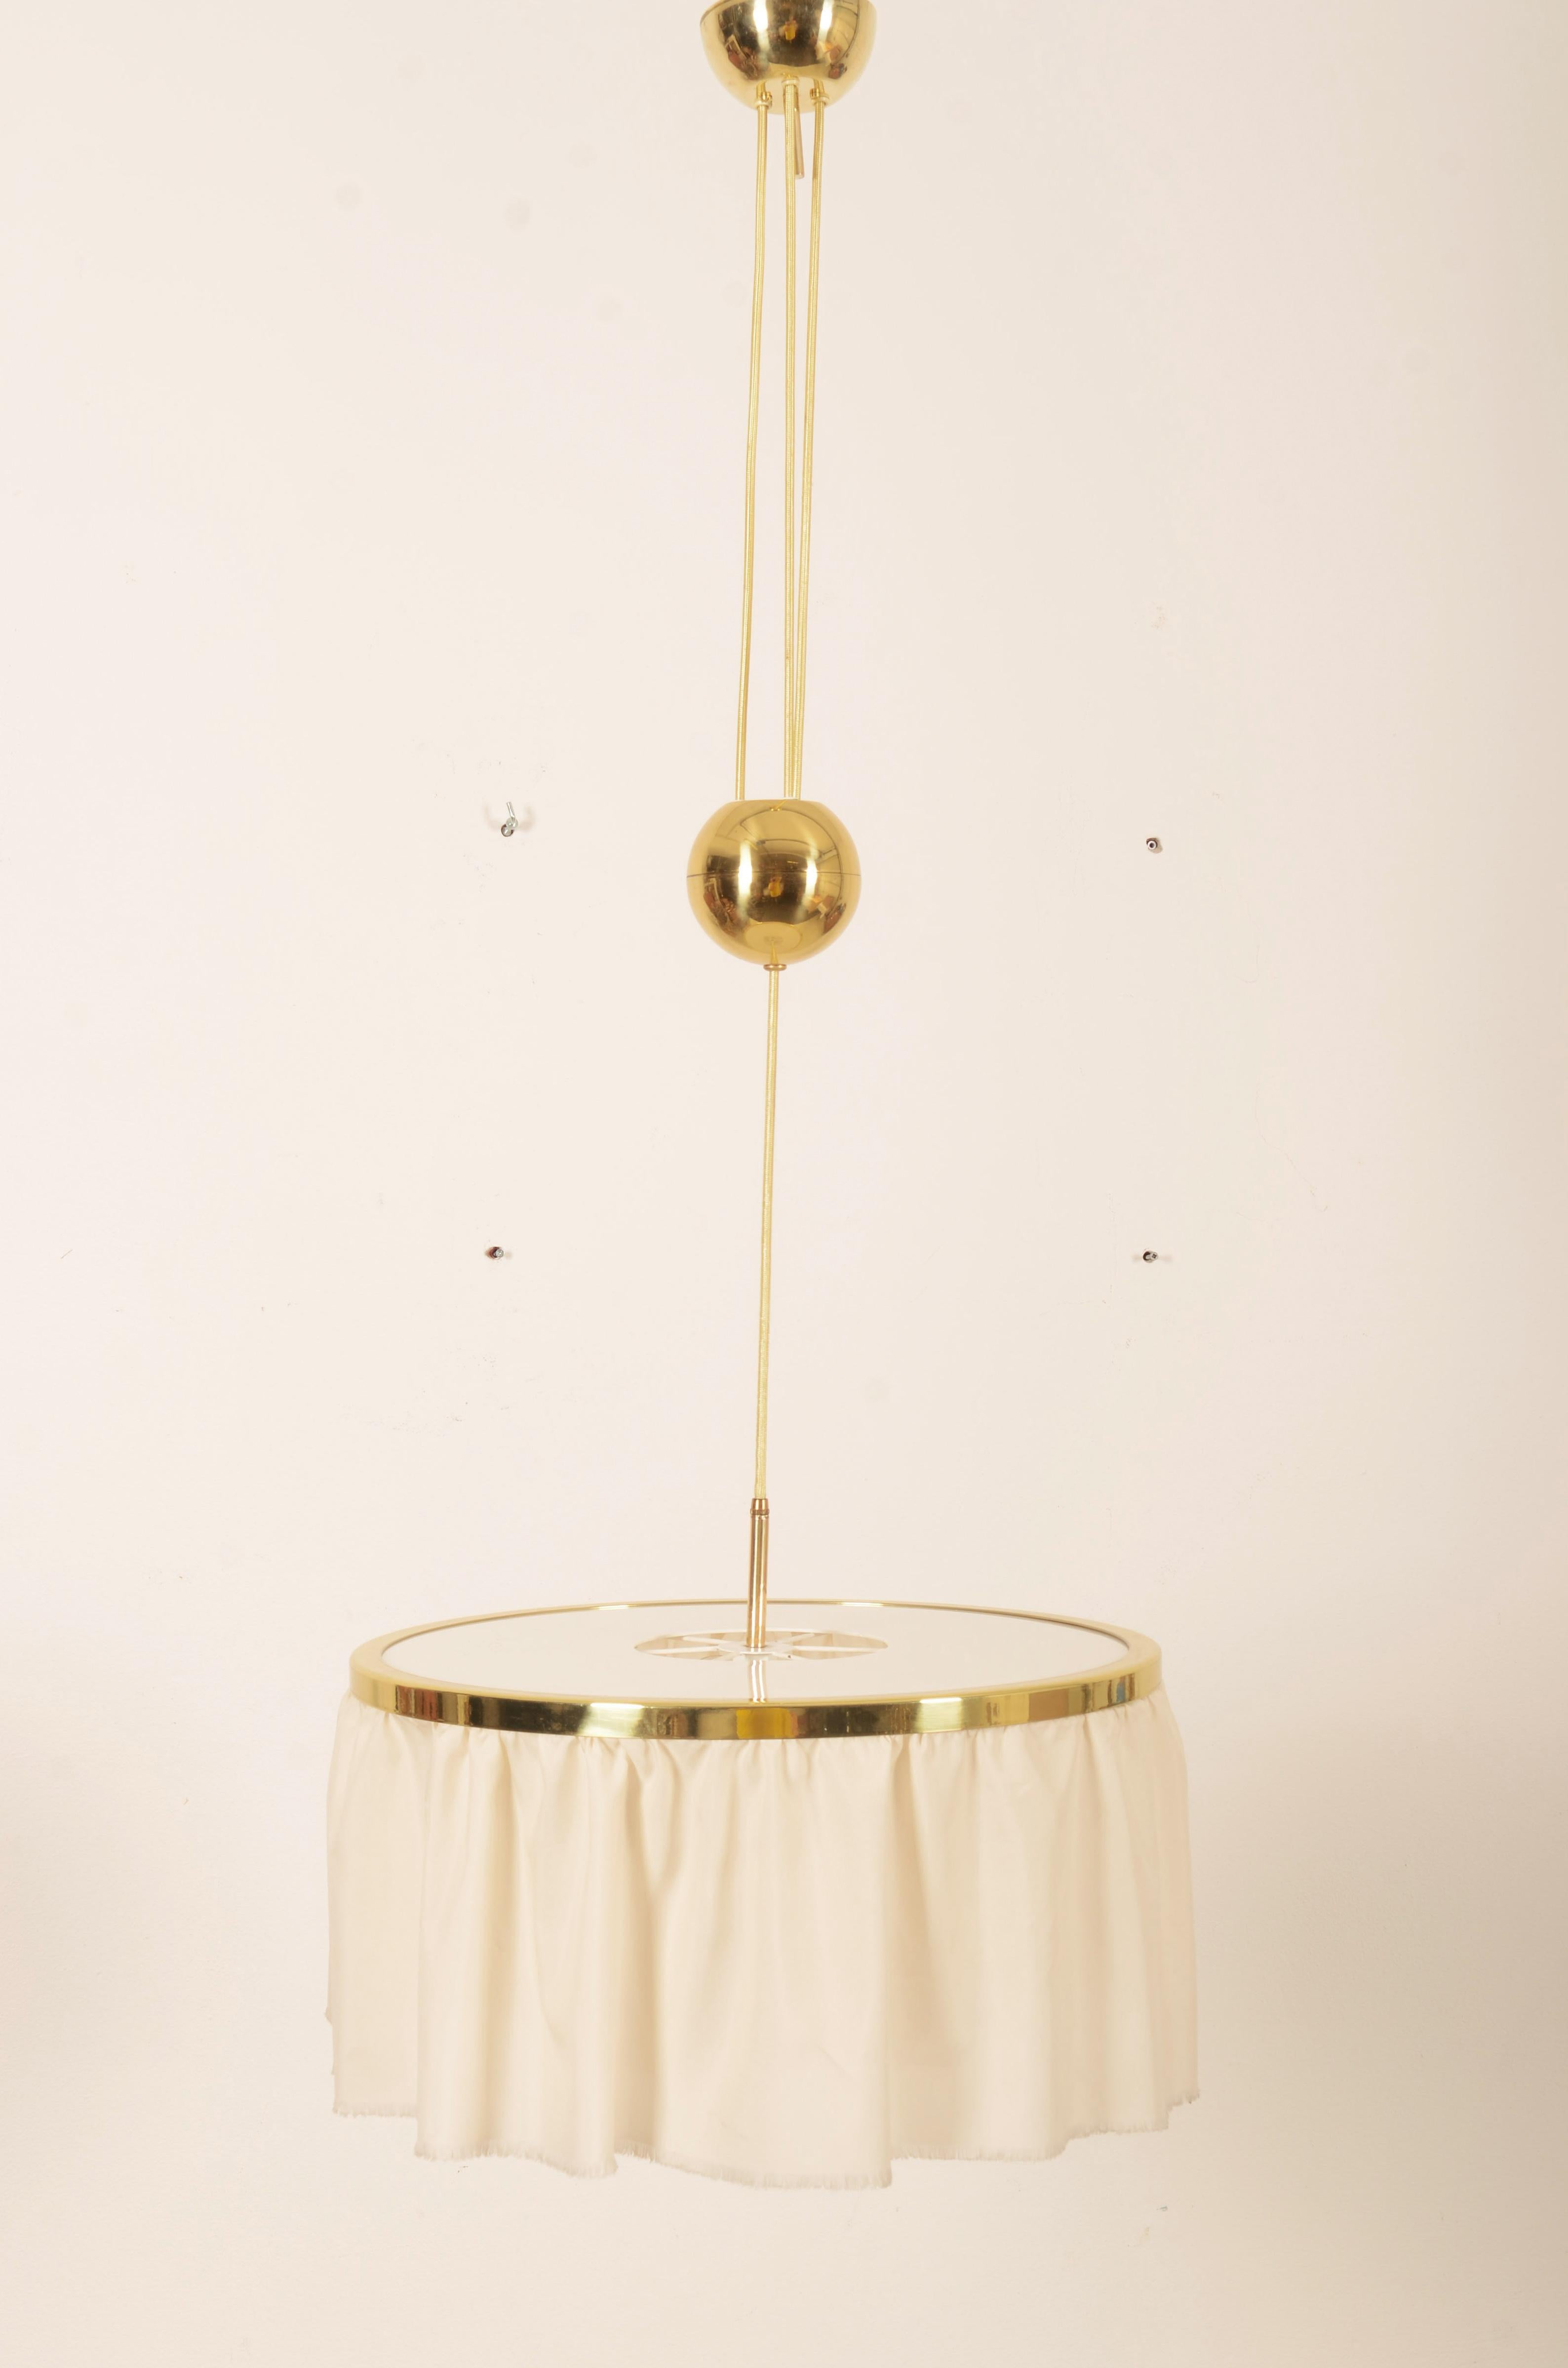 A height adjustable brass counter balance pendant lamp by J.T. Kalmar manufactured in midcentury in 1950s and designed by Adolf Loos. Fitted with three E27 sockets. The lamp is fully restored with new electric.